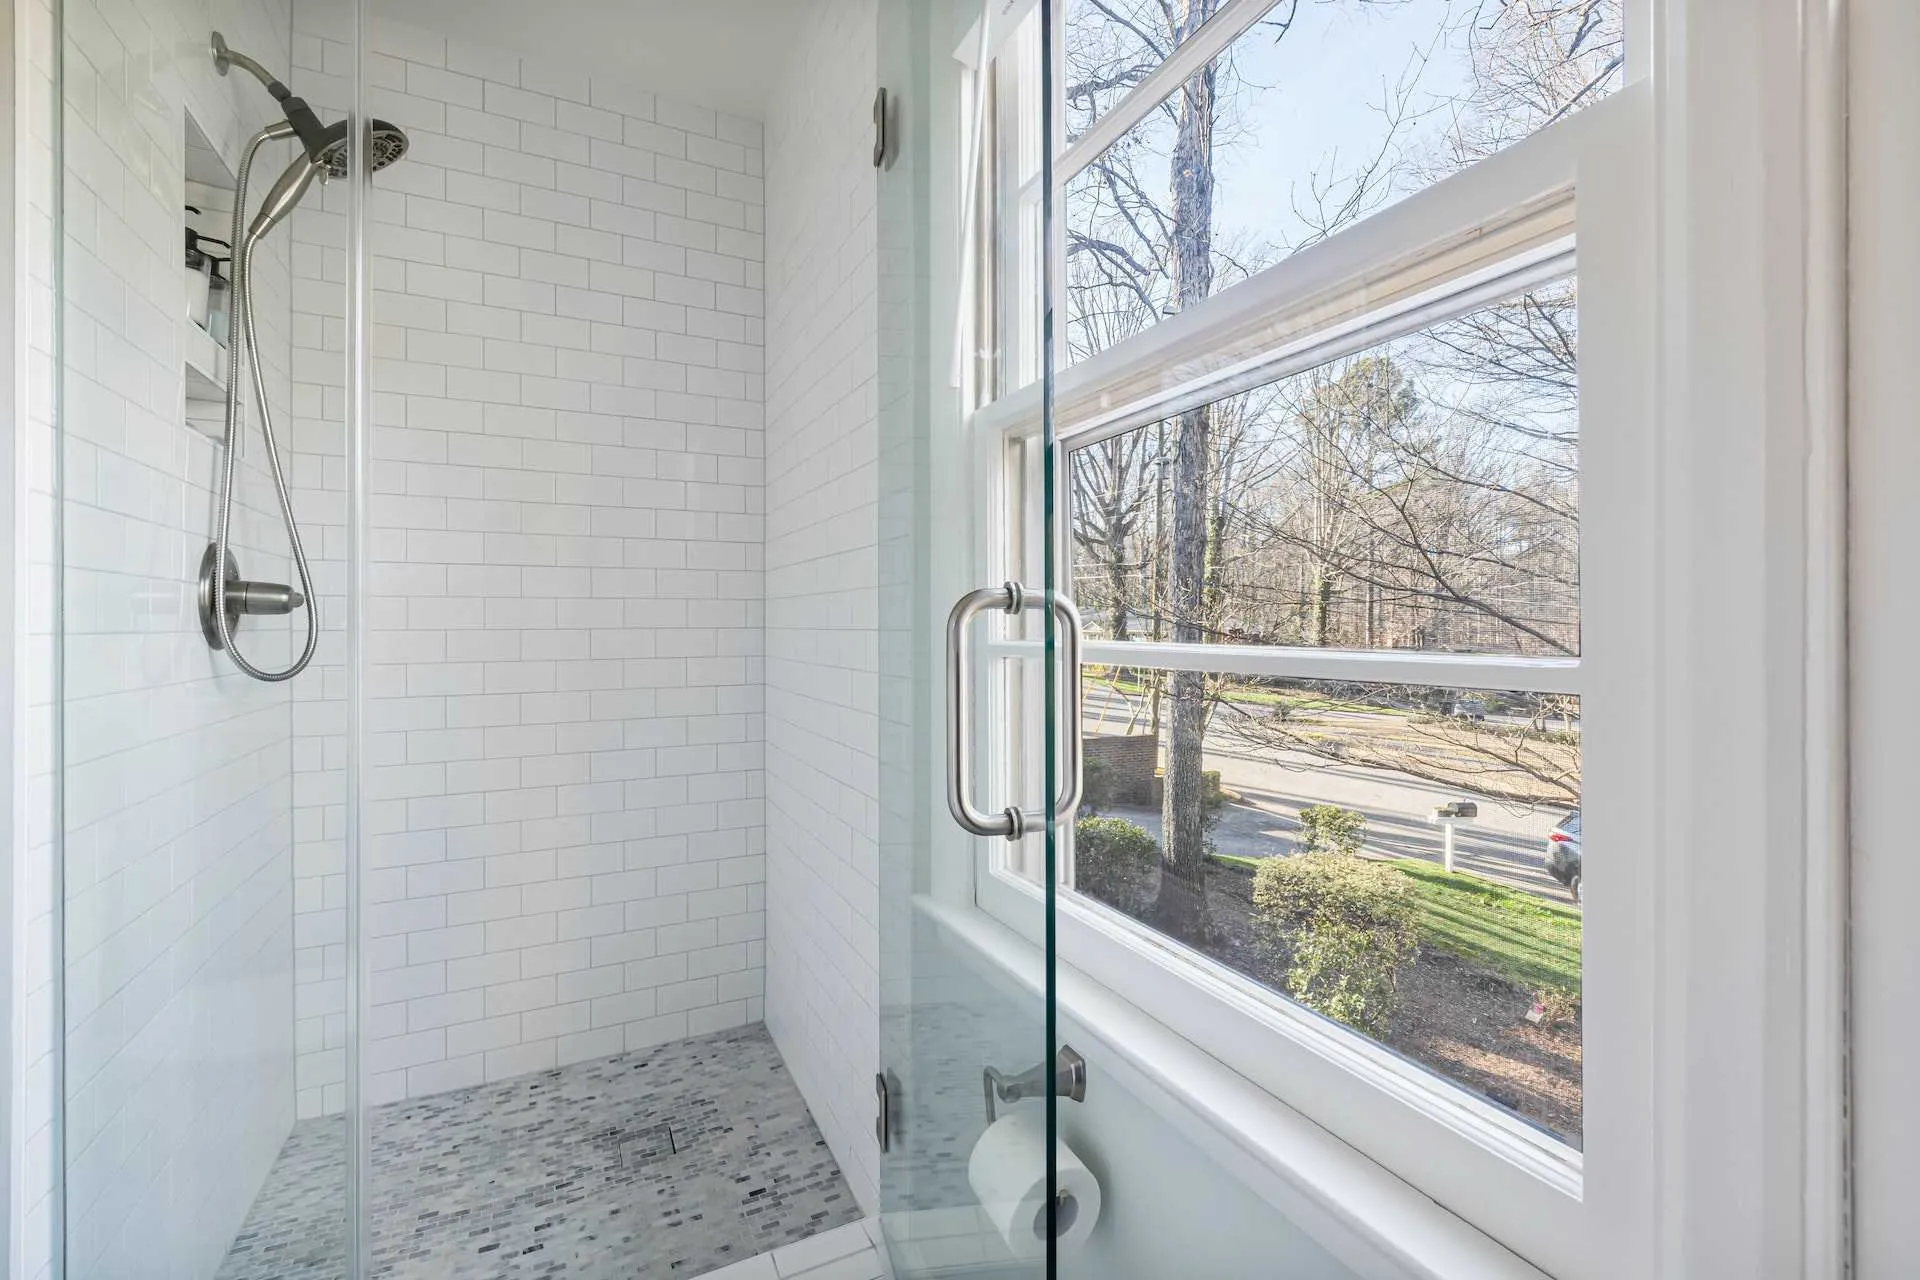 an image about An image about a bathroom with a glass shower door and a view of a tree.